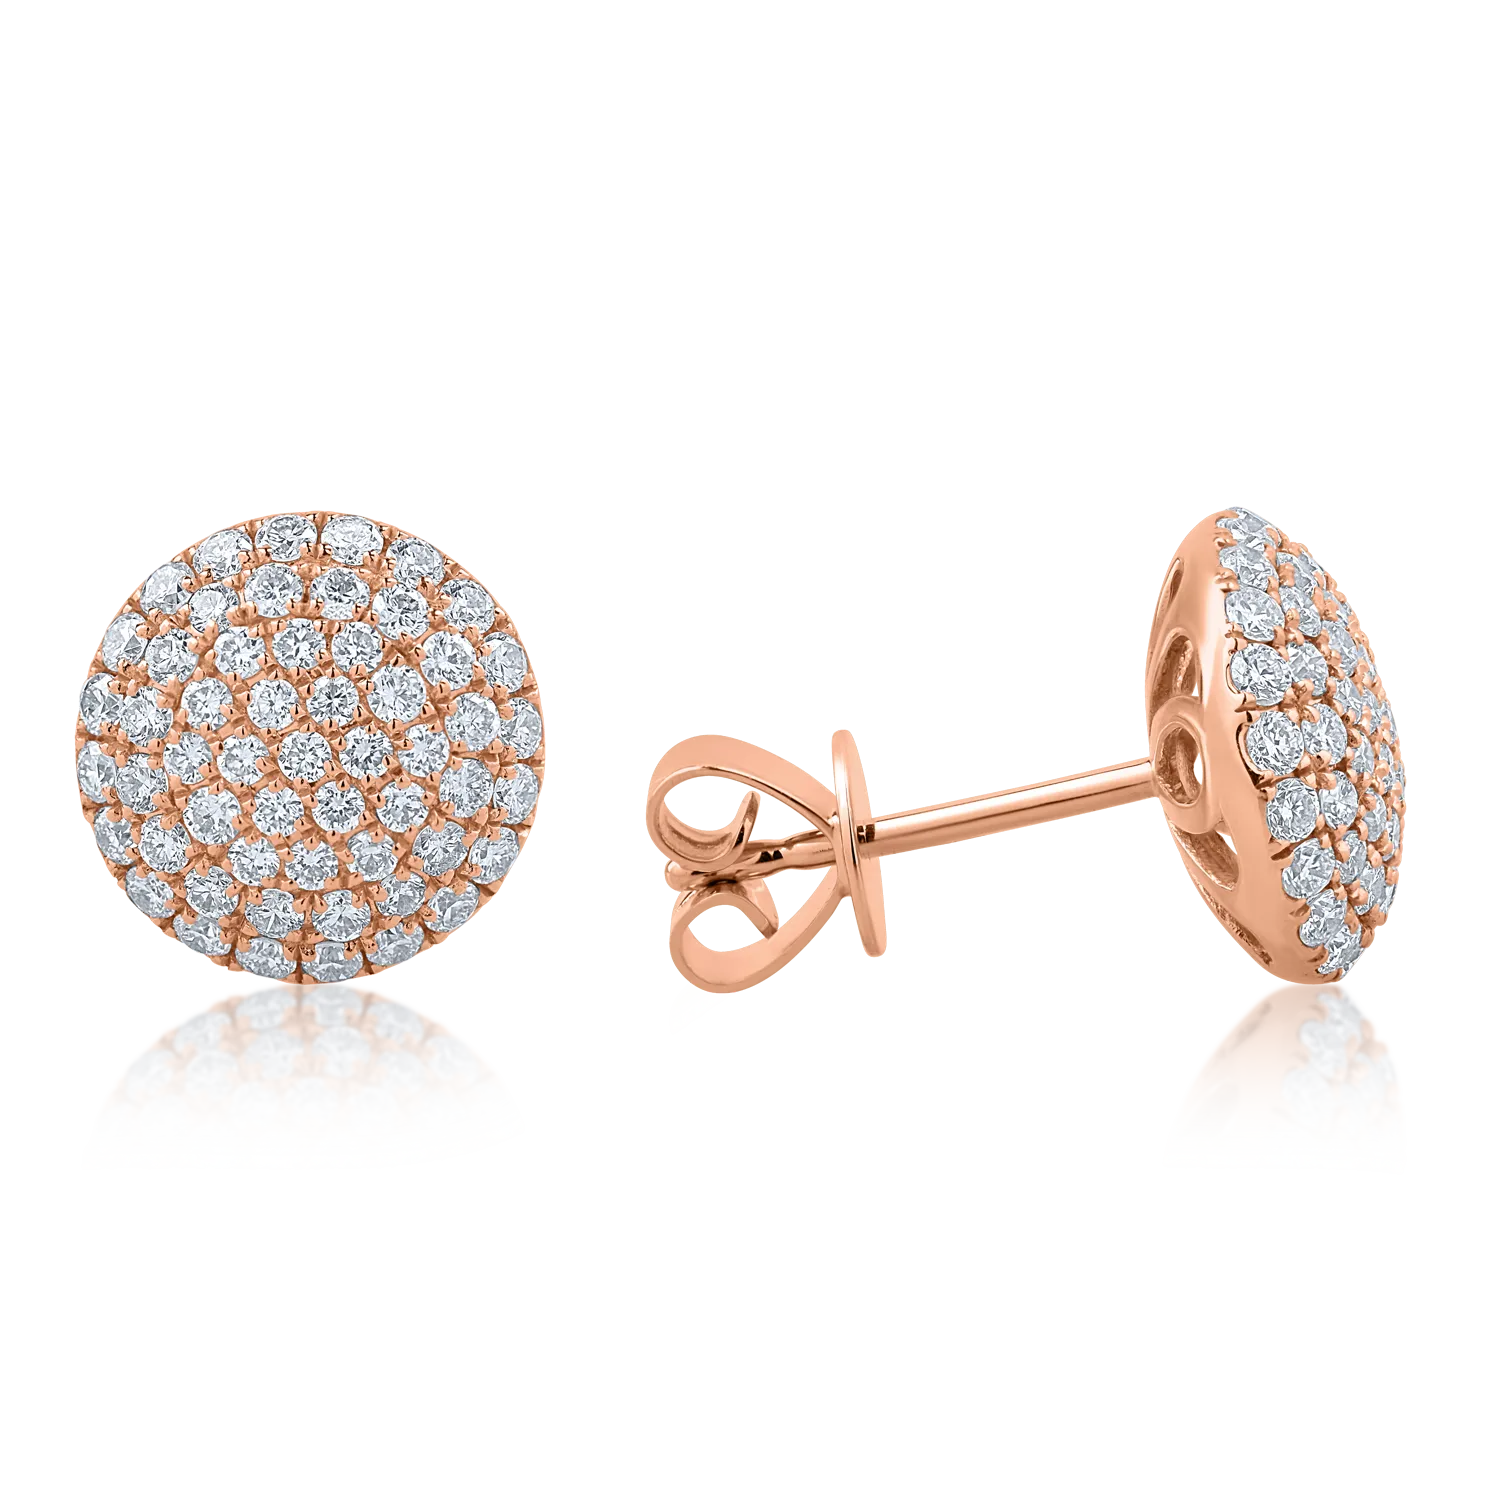 Rose gold earrings with 1.01ct diamonds